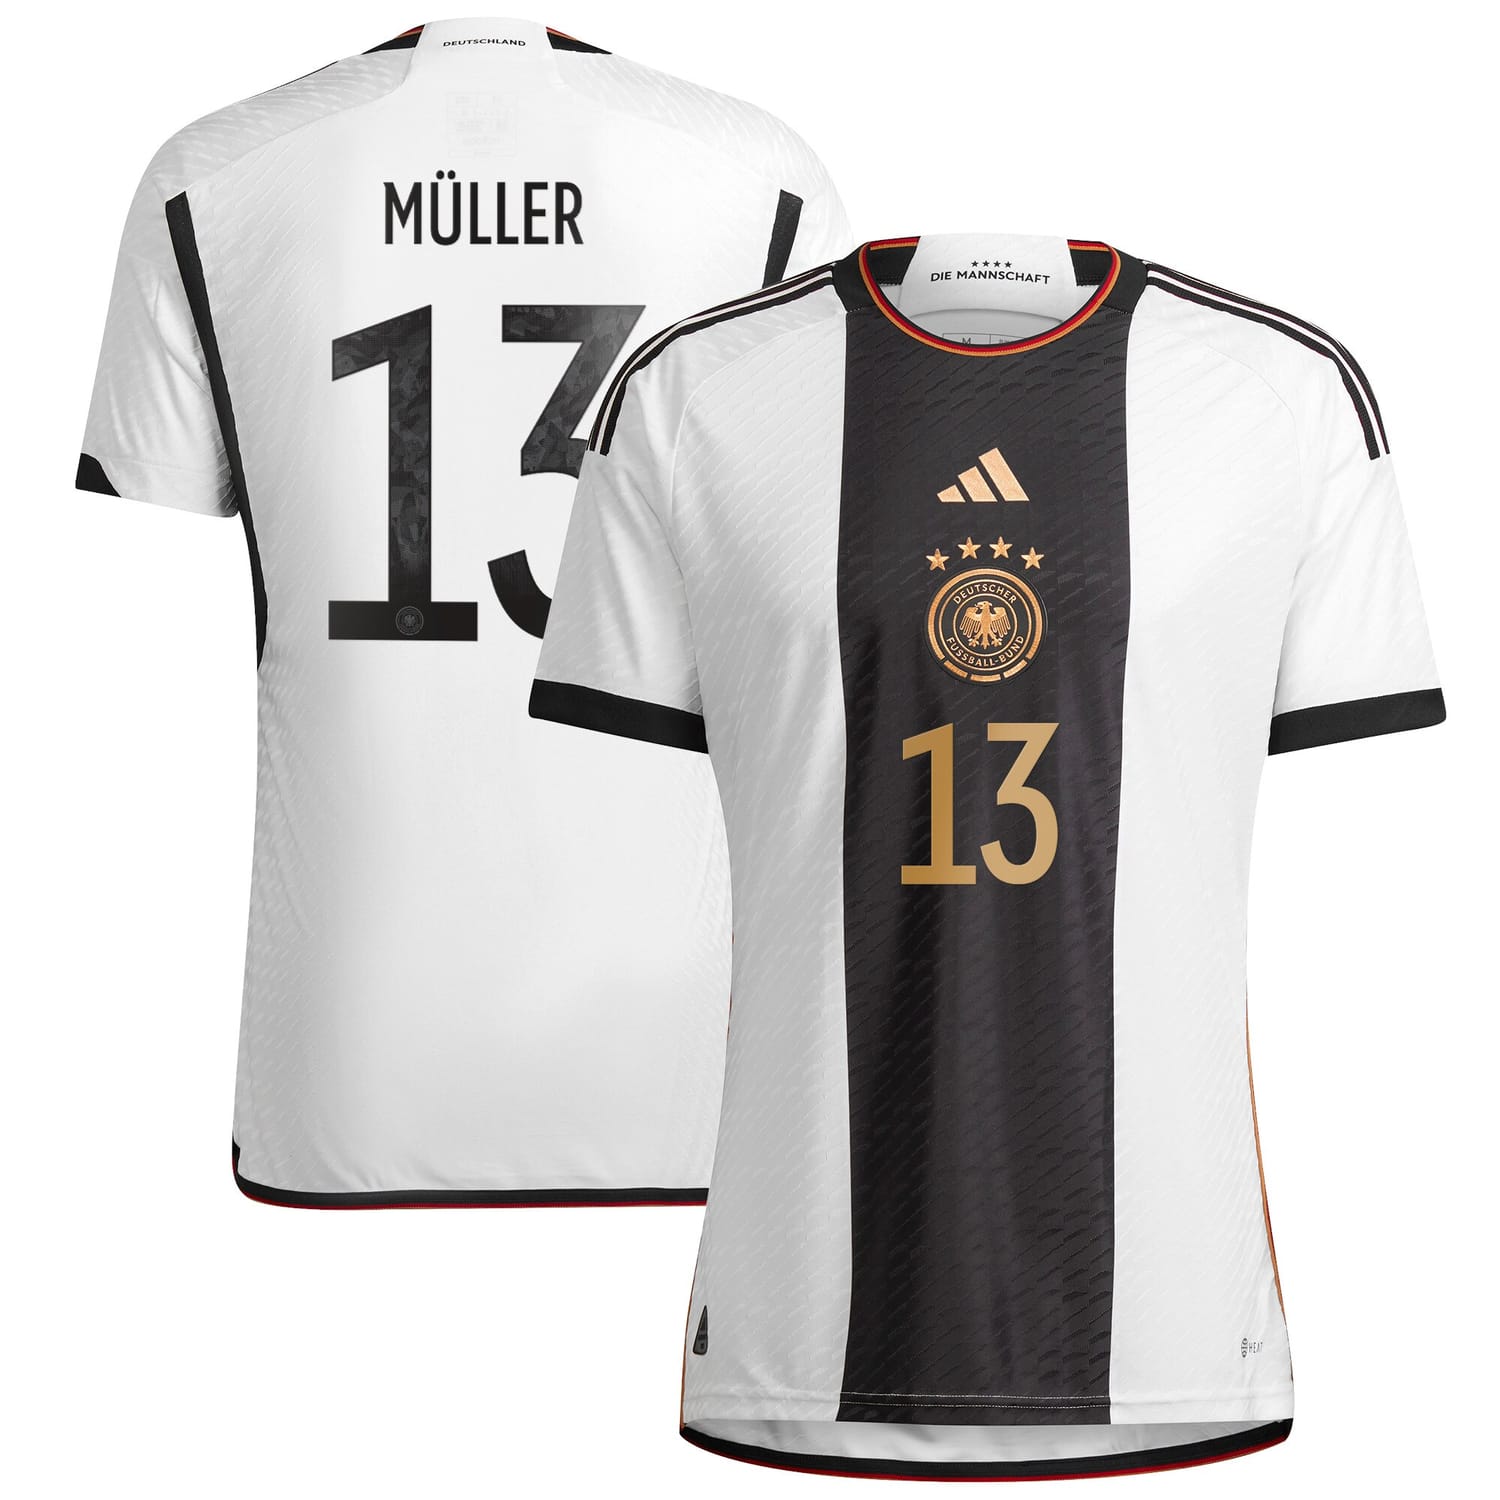 Germany National Team Home Jersey Shirt White 2022-23 player Thomas Müller printing for Men